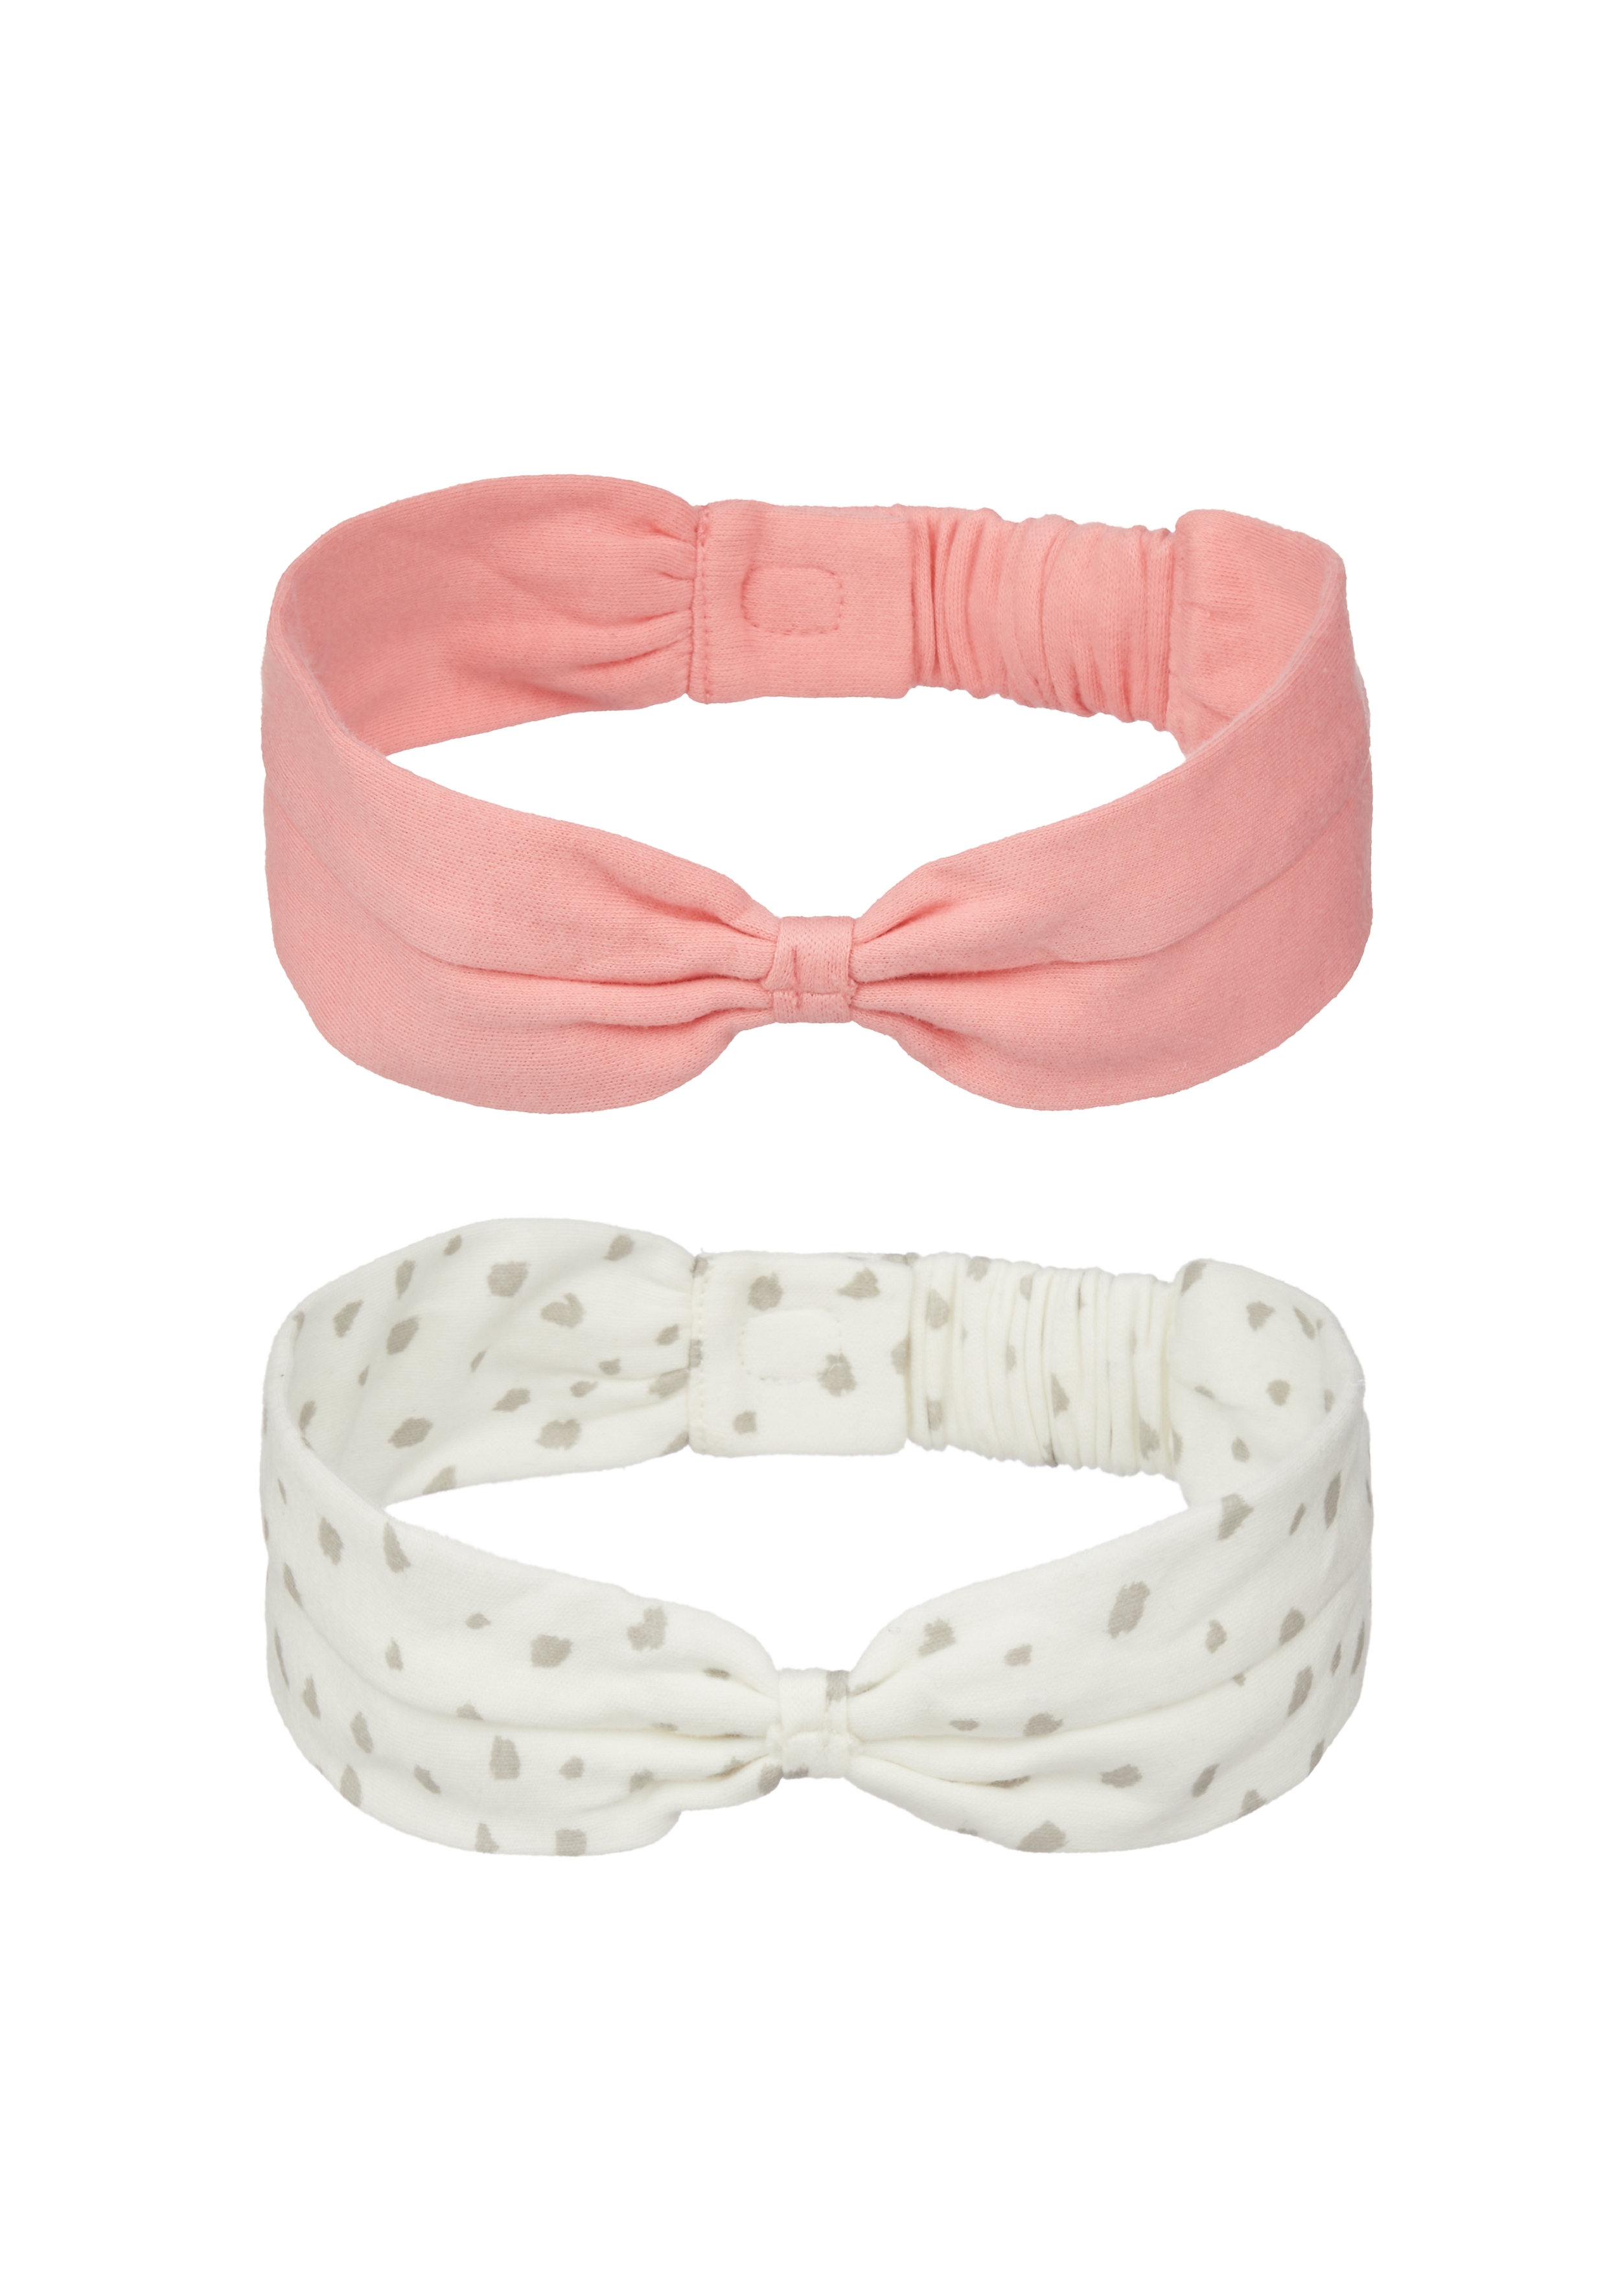 Mothercare | Girls Headbands Printed - Pack Of 2 - Pink White